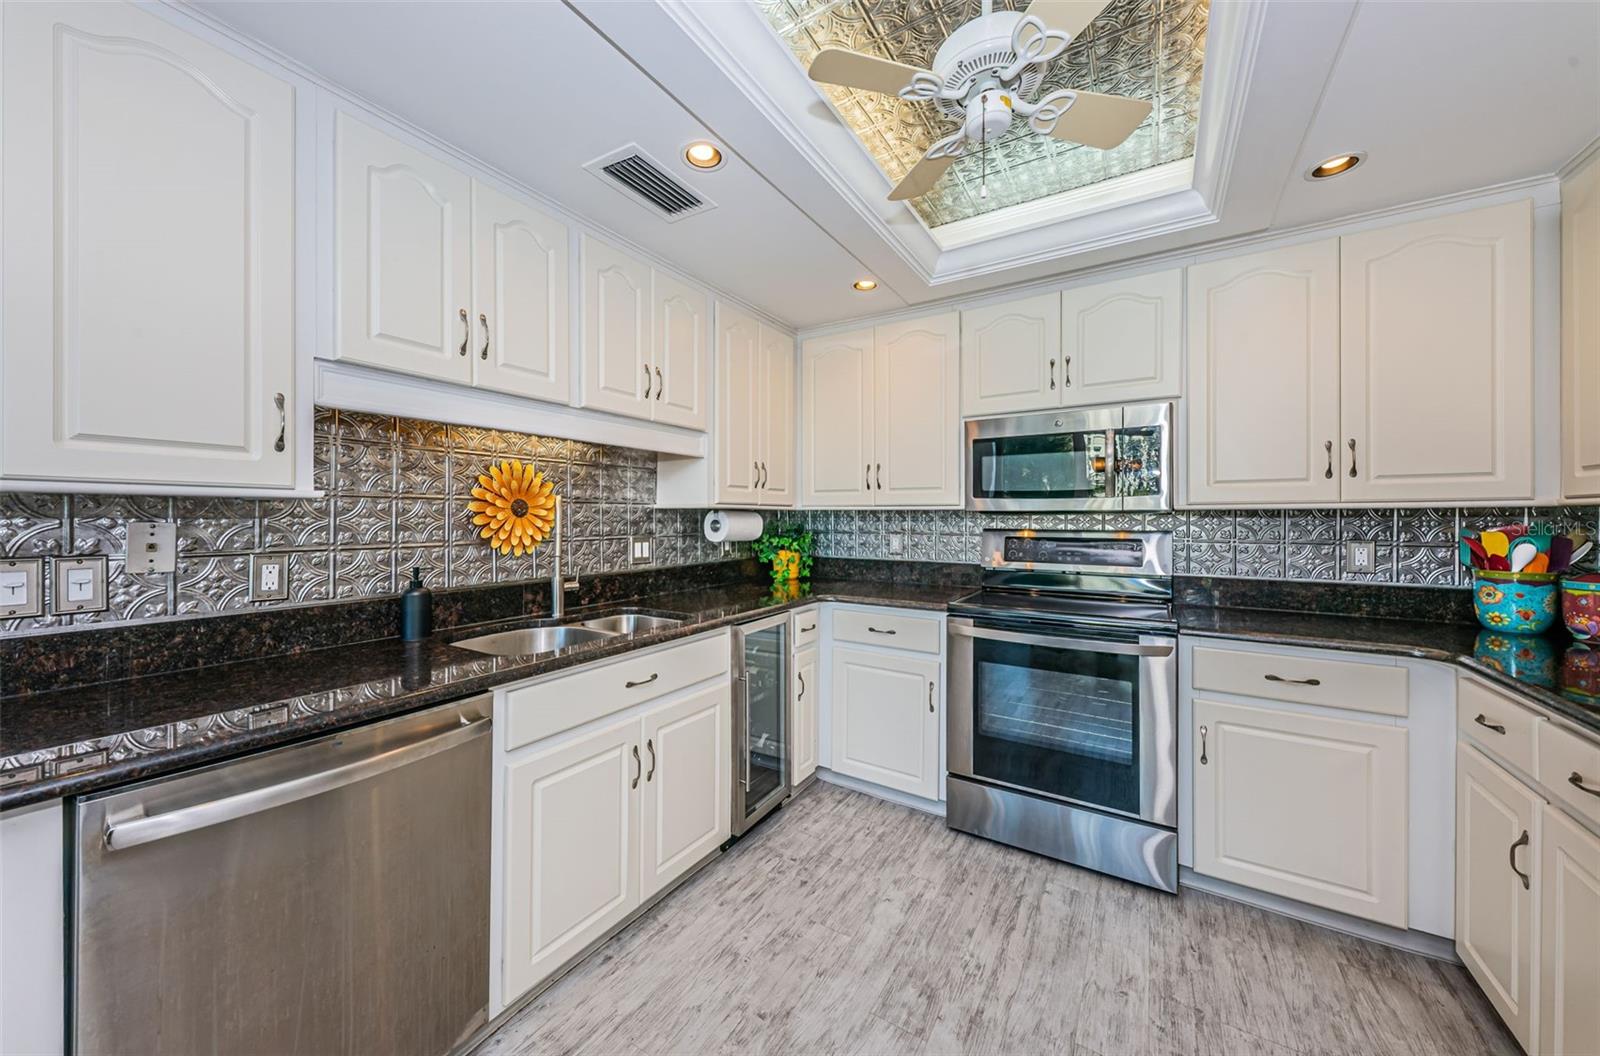 Well Accessorized Cucina Features Stainless Appliances, Granite Surfaces, Solid Wood Cabinetry and Plank Tile Floors.